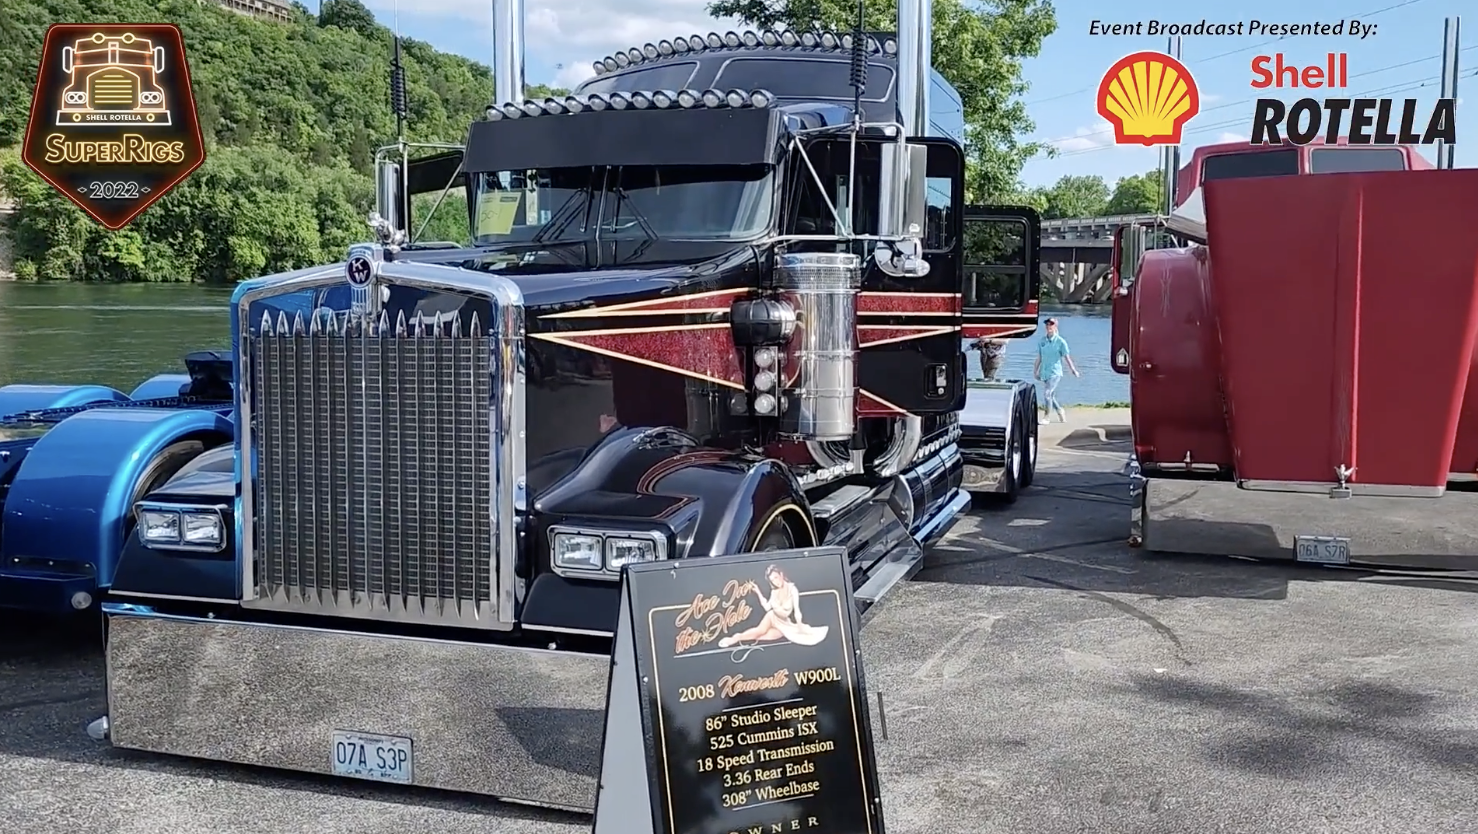 Additional coverage of the Shell Rotella Super Rigs show.